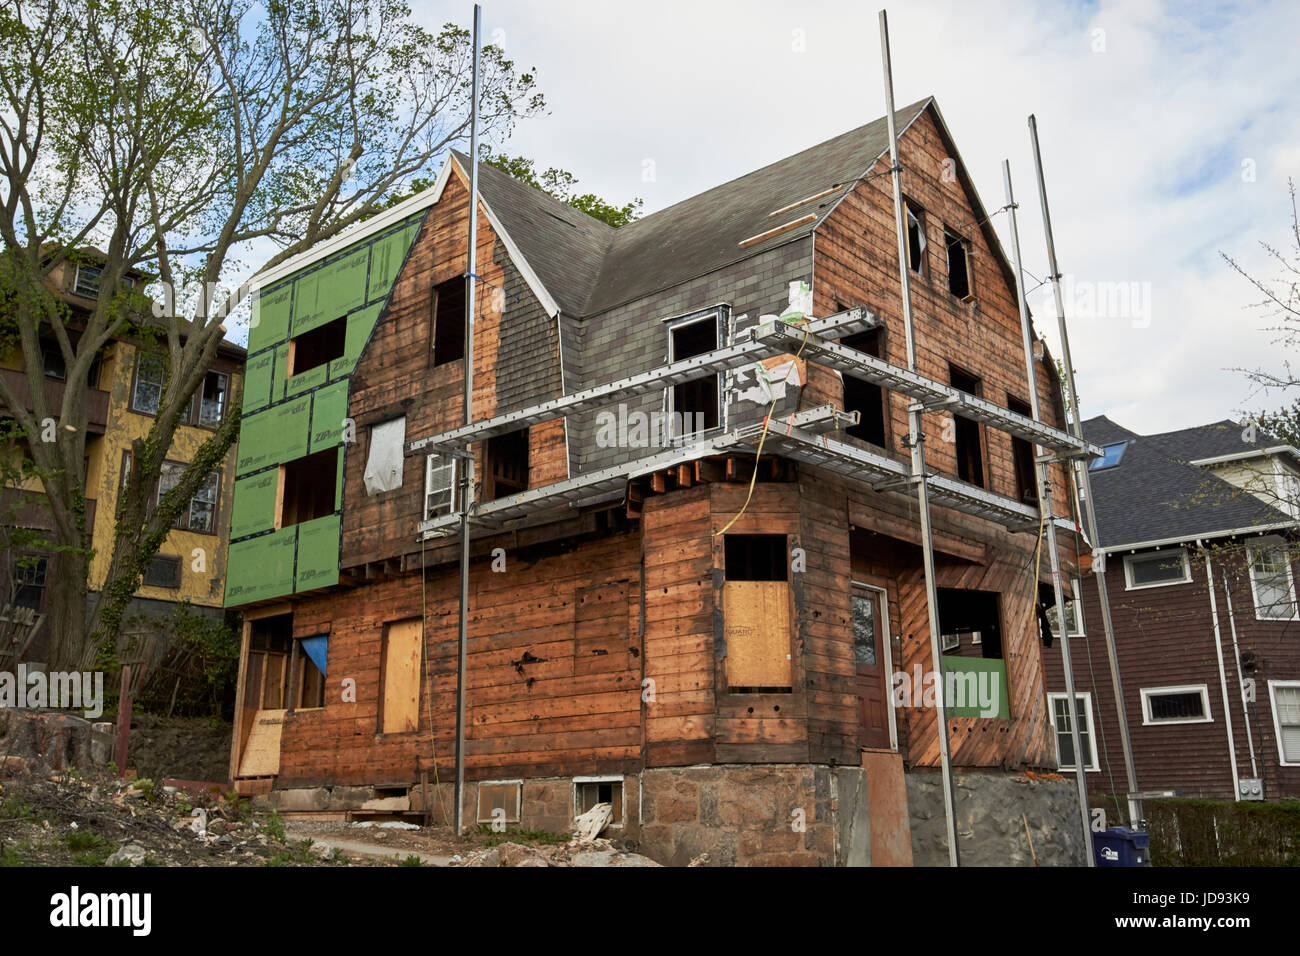 building preservation work ongoing on wooden three storey house savin hill dorchester Boston USA Stock Photo